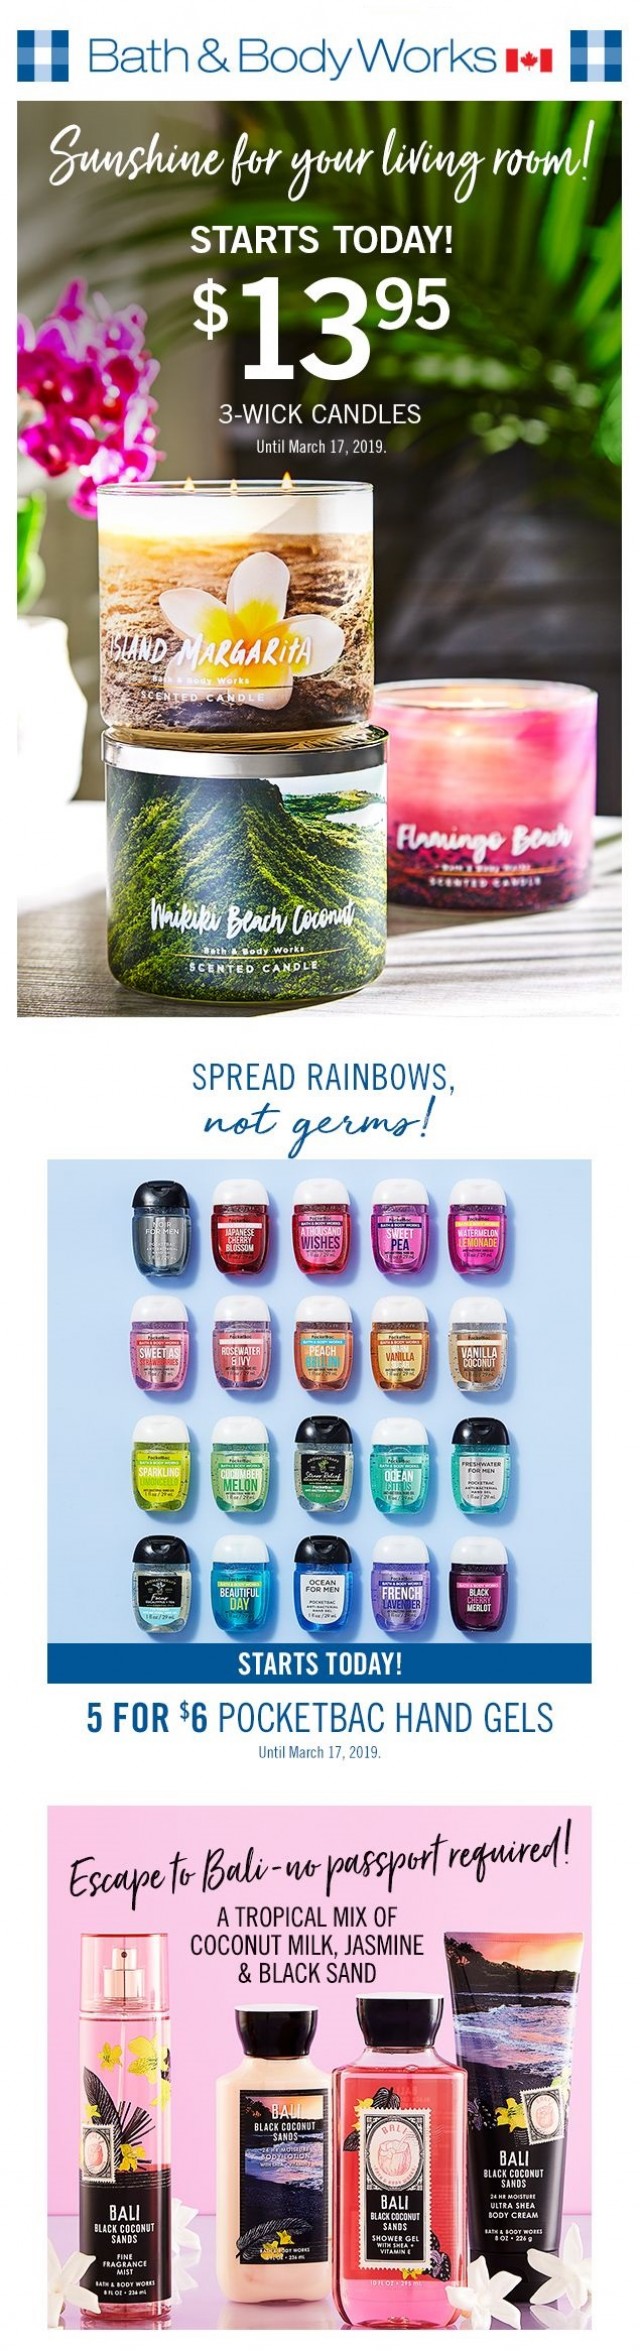 Coupon for: Bath & Body Works - Welcome home (sweet home)!